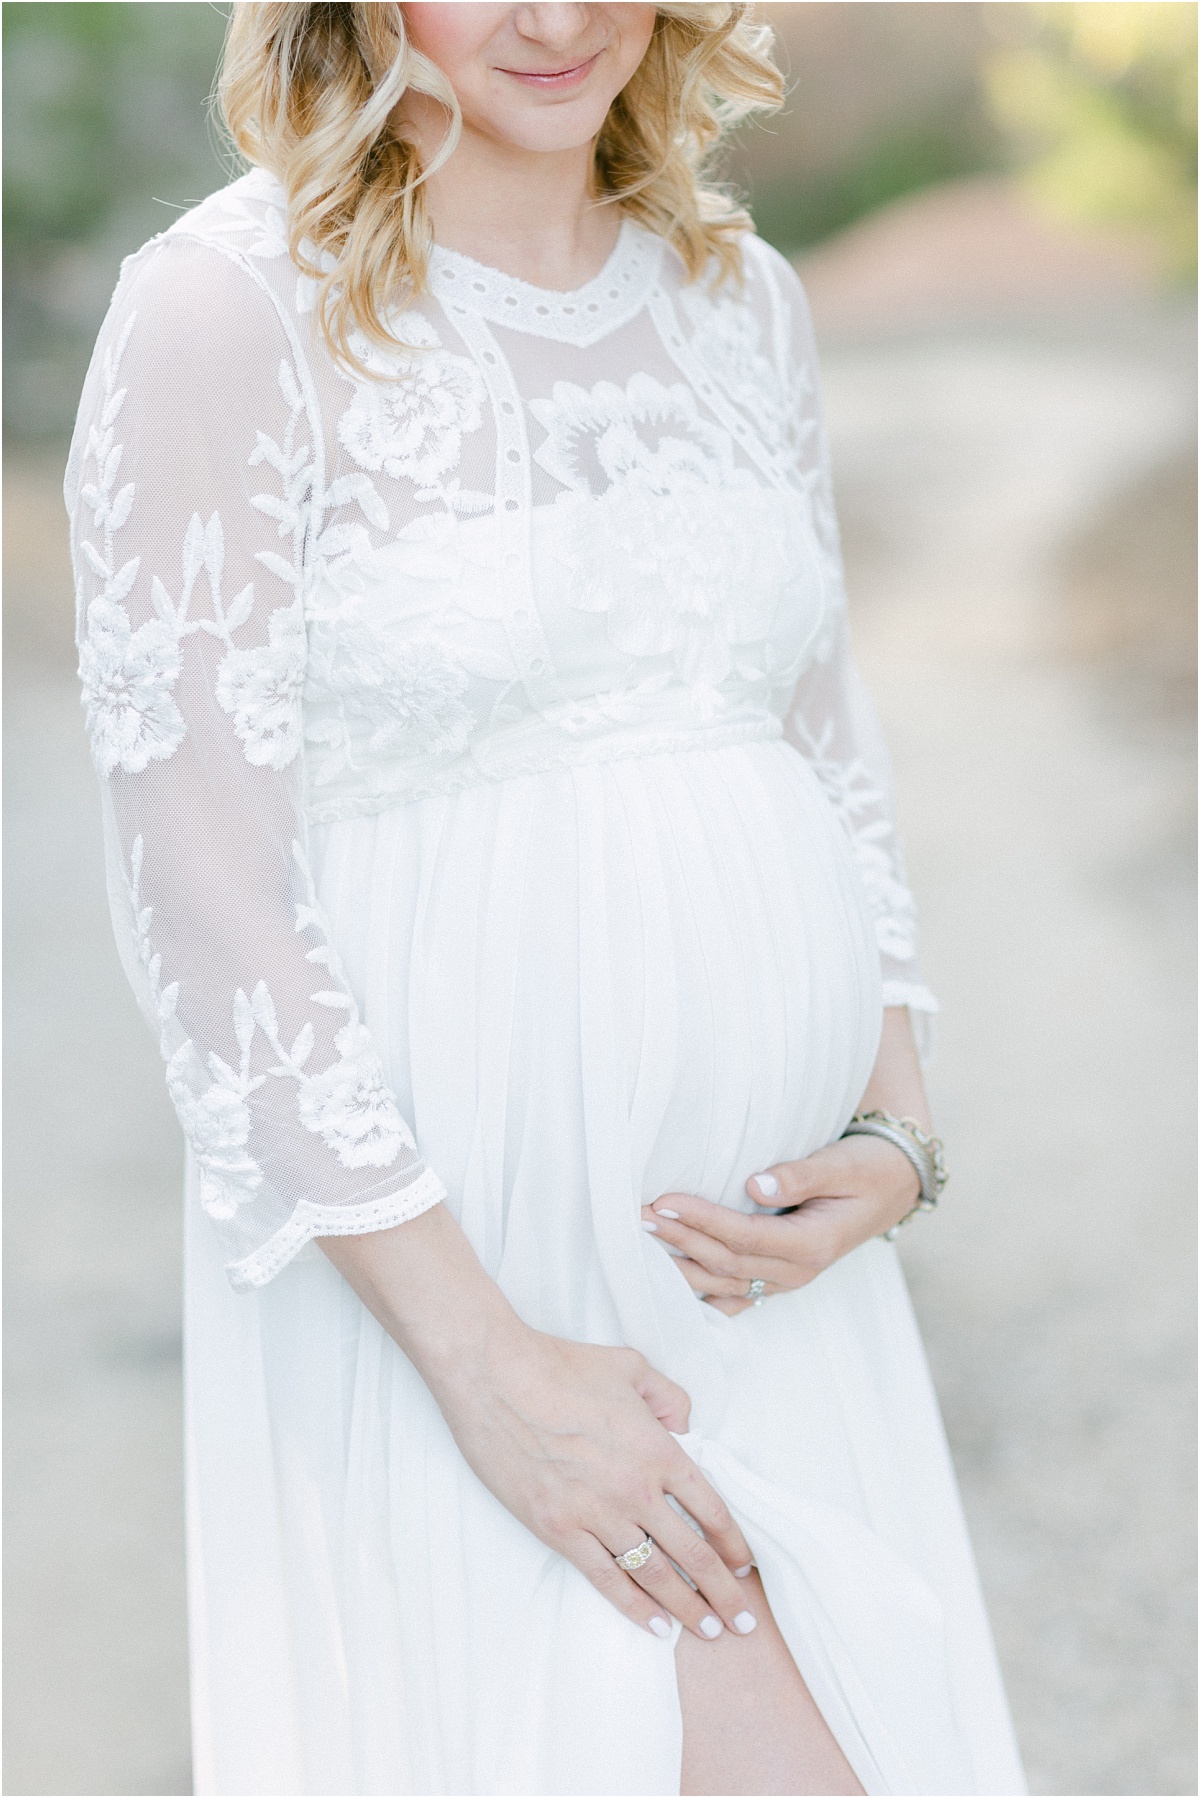 What to wear for your maternity session